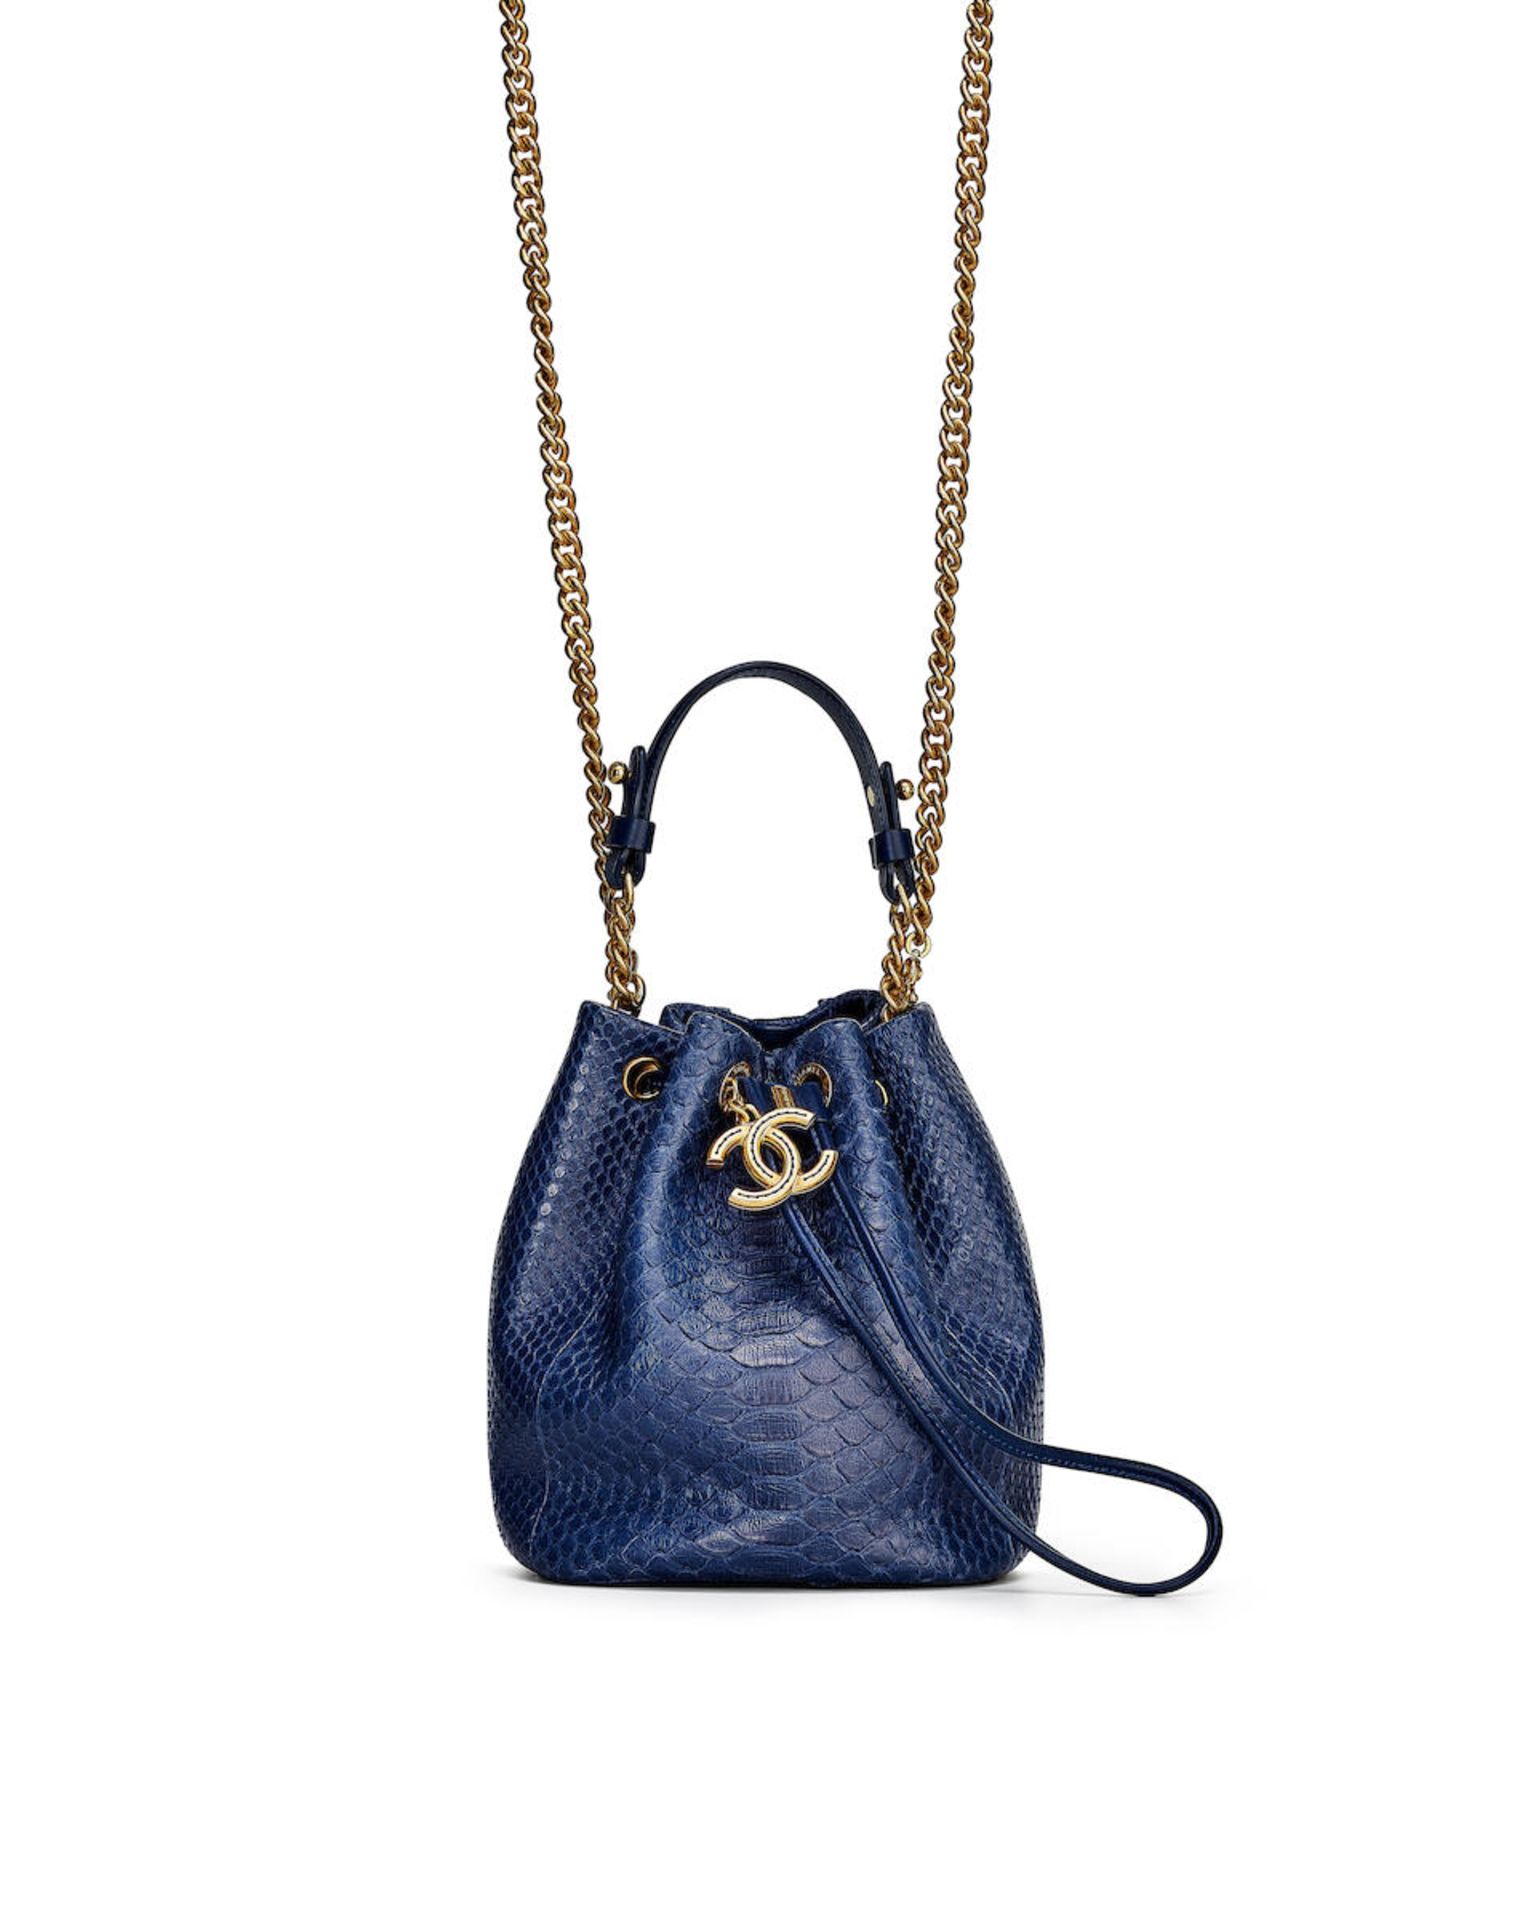 CHANEL: BLUE PYTHON BUCKET BAG WITH POLISHED GOLD TONED HARDWARE (Includes serial sticker, auth...